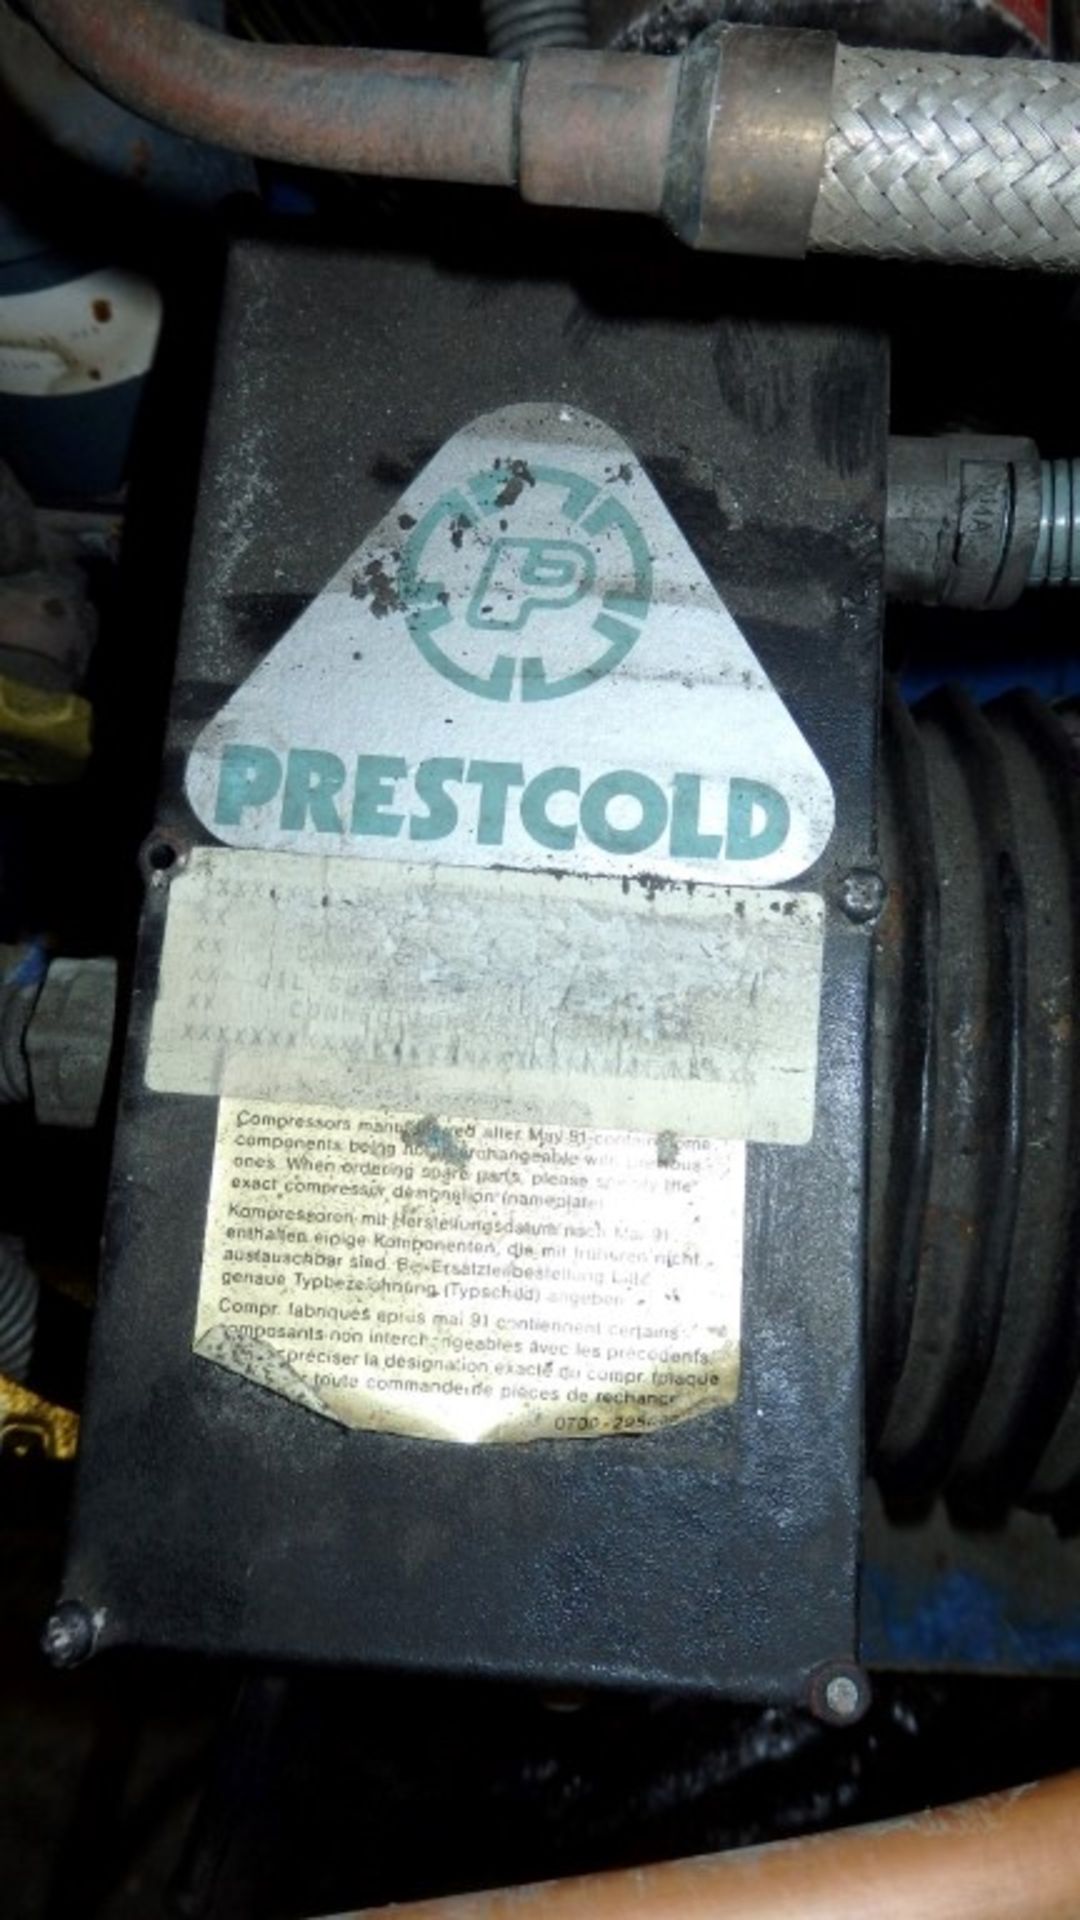 1 x Prestcold / Copeland Refrigeration Unit - Features Compressor & Fan Unit - Used, Sold As - Image 4 of 5